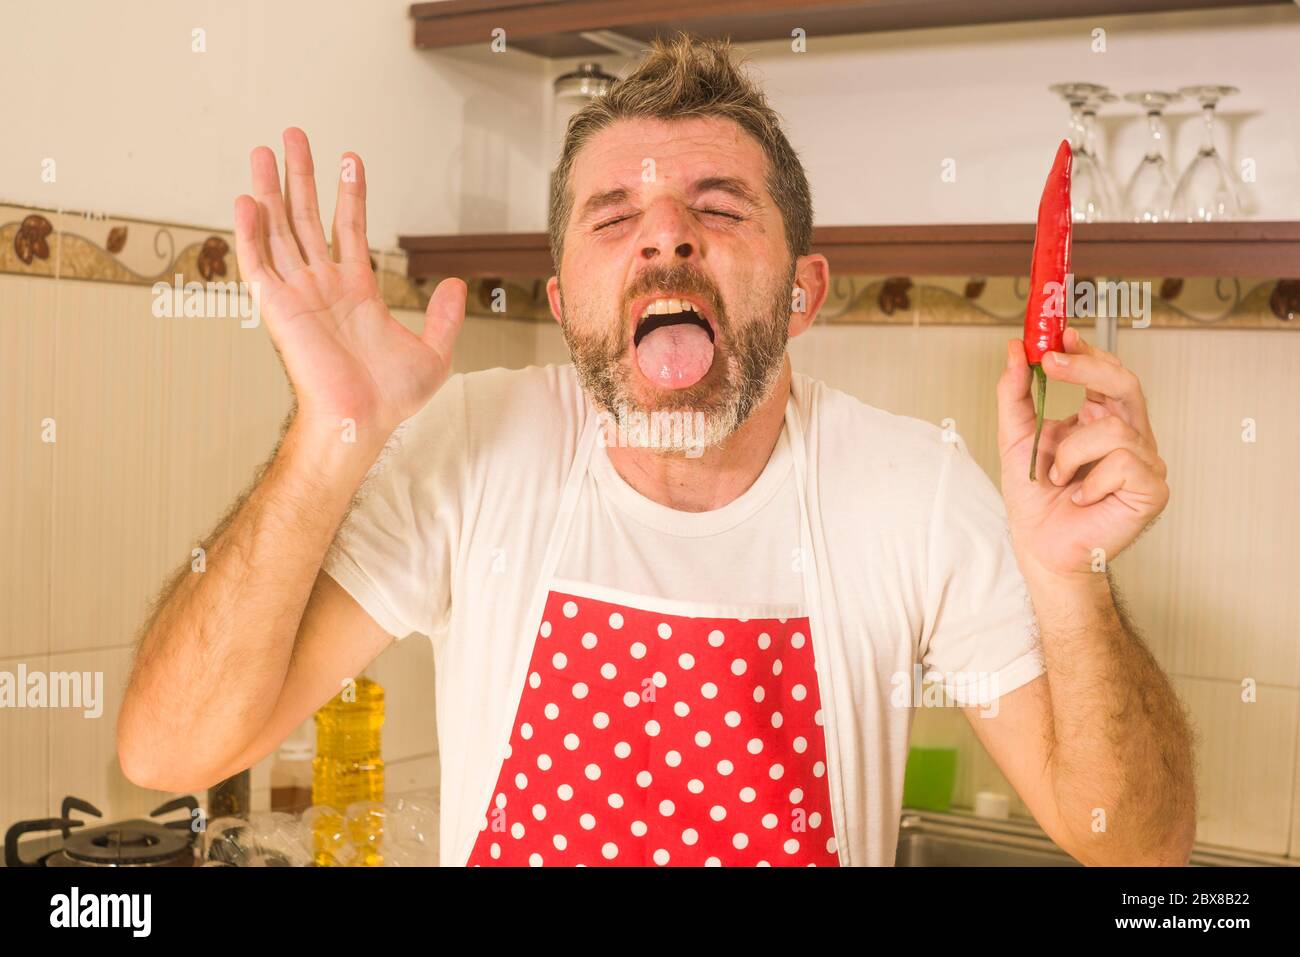 funny home portrait of home cook man in red kitchen apron holding spicy chili gesturing desperate taking his burning tongue out after tasting it crazy Stock Photo